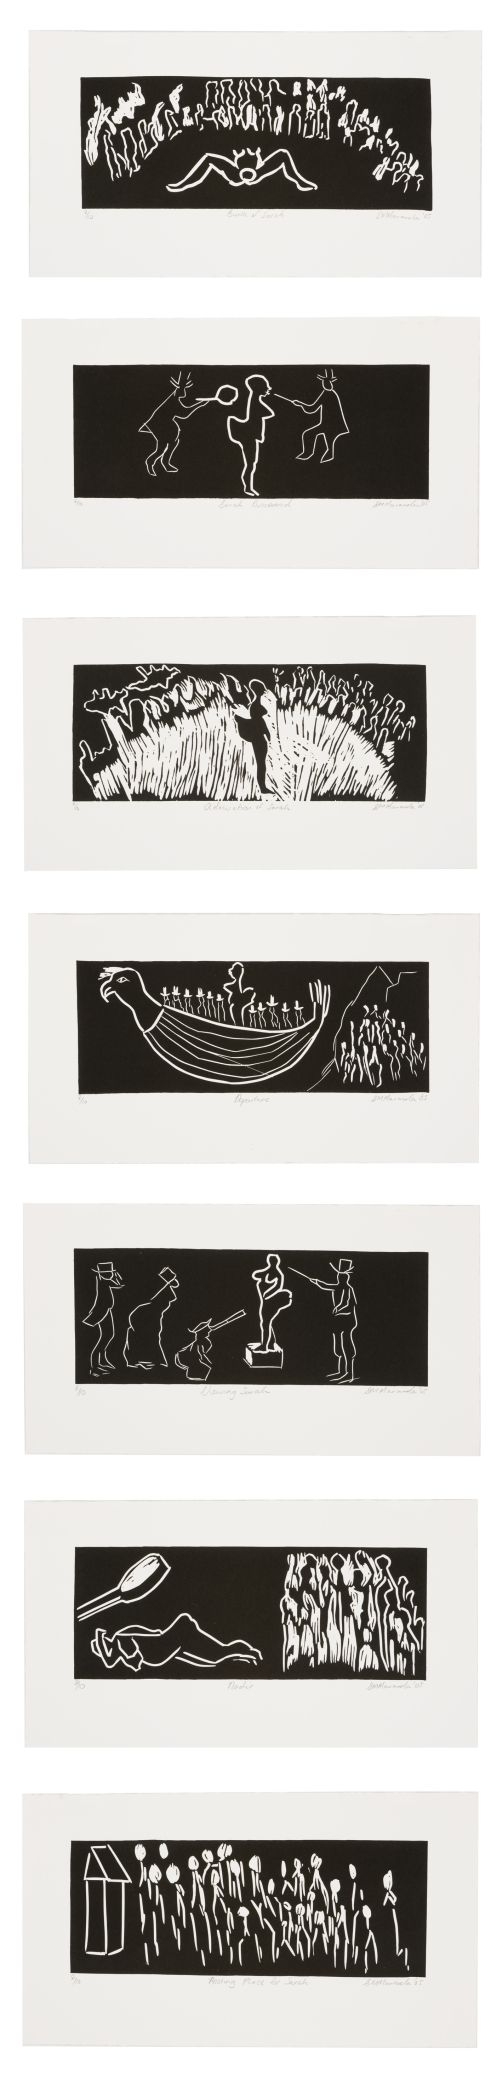 Click the image for a view of: Sarah Baartman remembered. 2005. Suite of 7 linocuts. Edition size 10. Image 110X300mm each